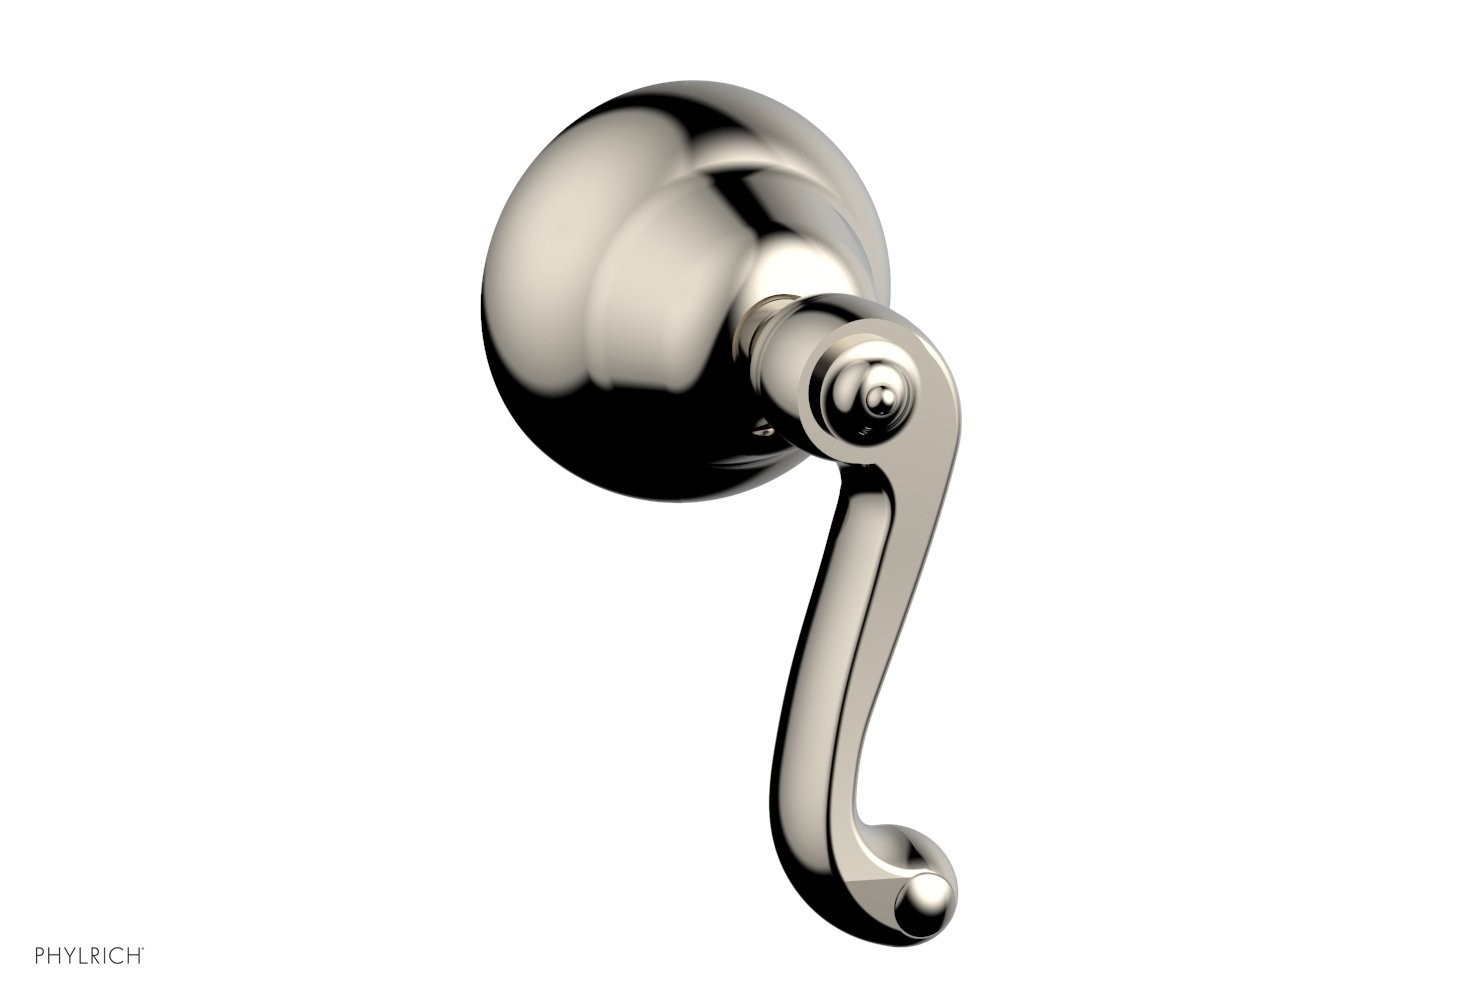 PHYLRICH D2PV102A/014 REVERE & SAVANNAH CURVED LEVER HANDLE VOLUME CONTROL OR DIVERTER TRIM